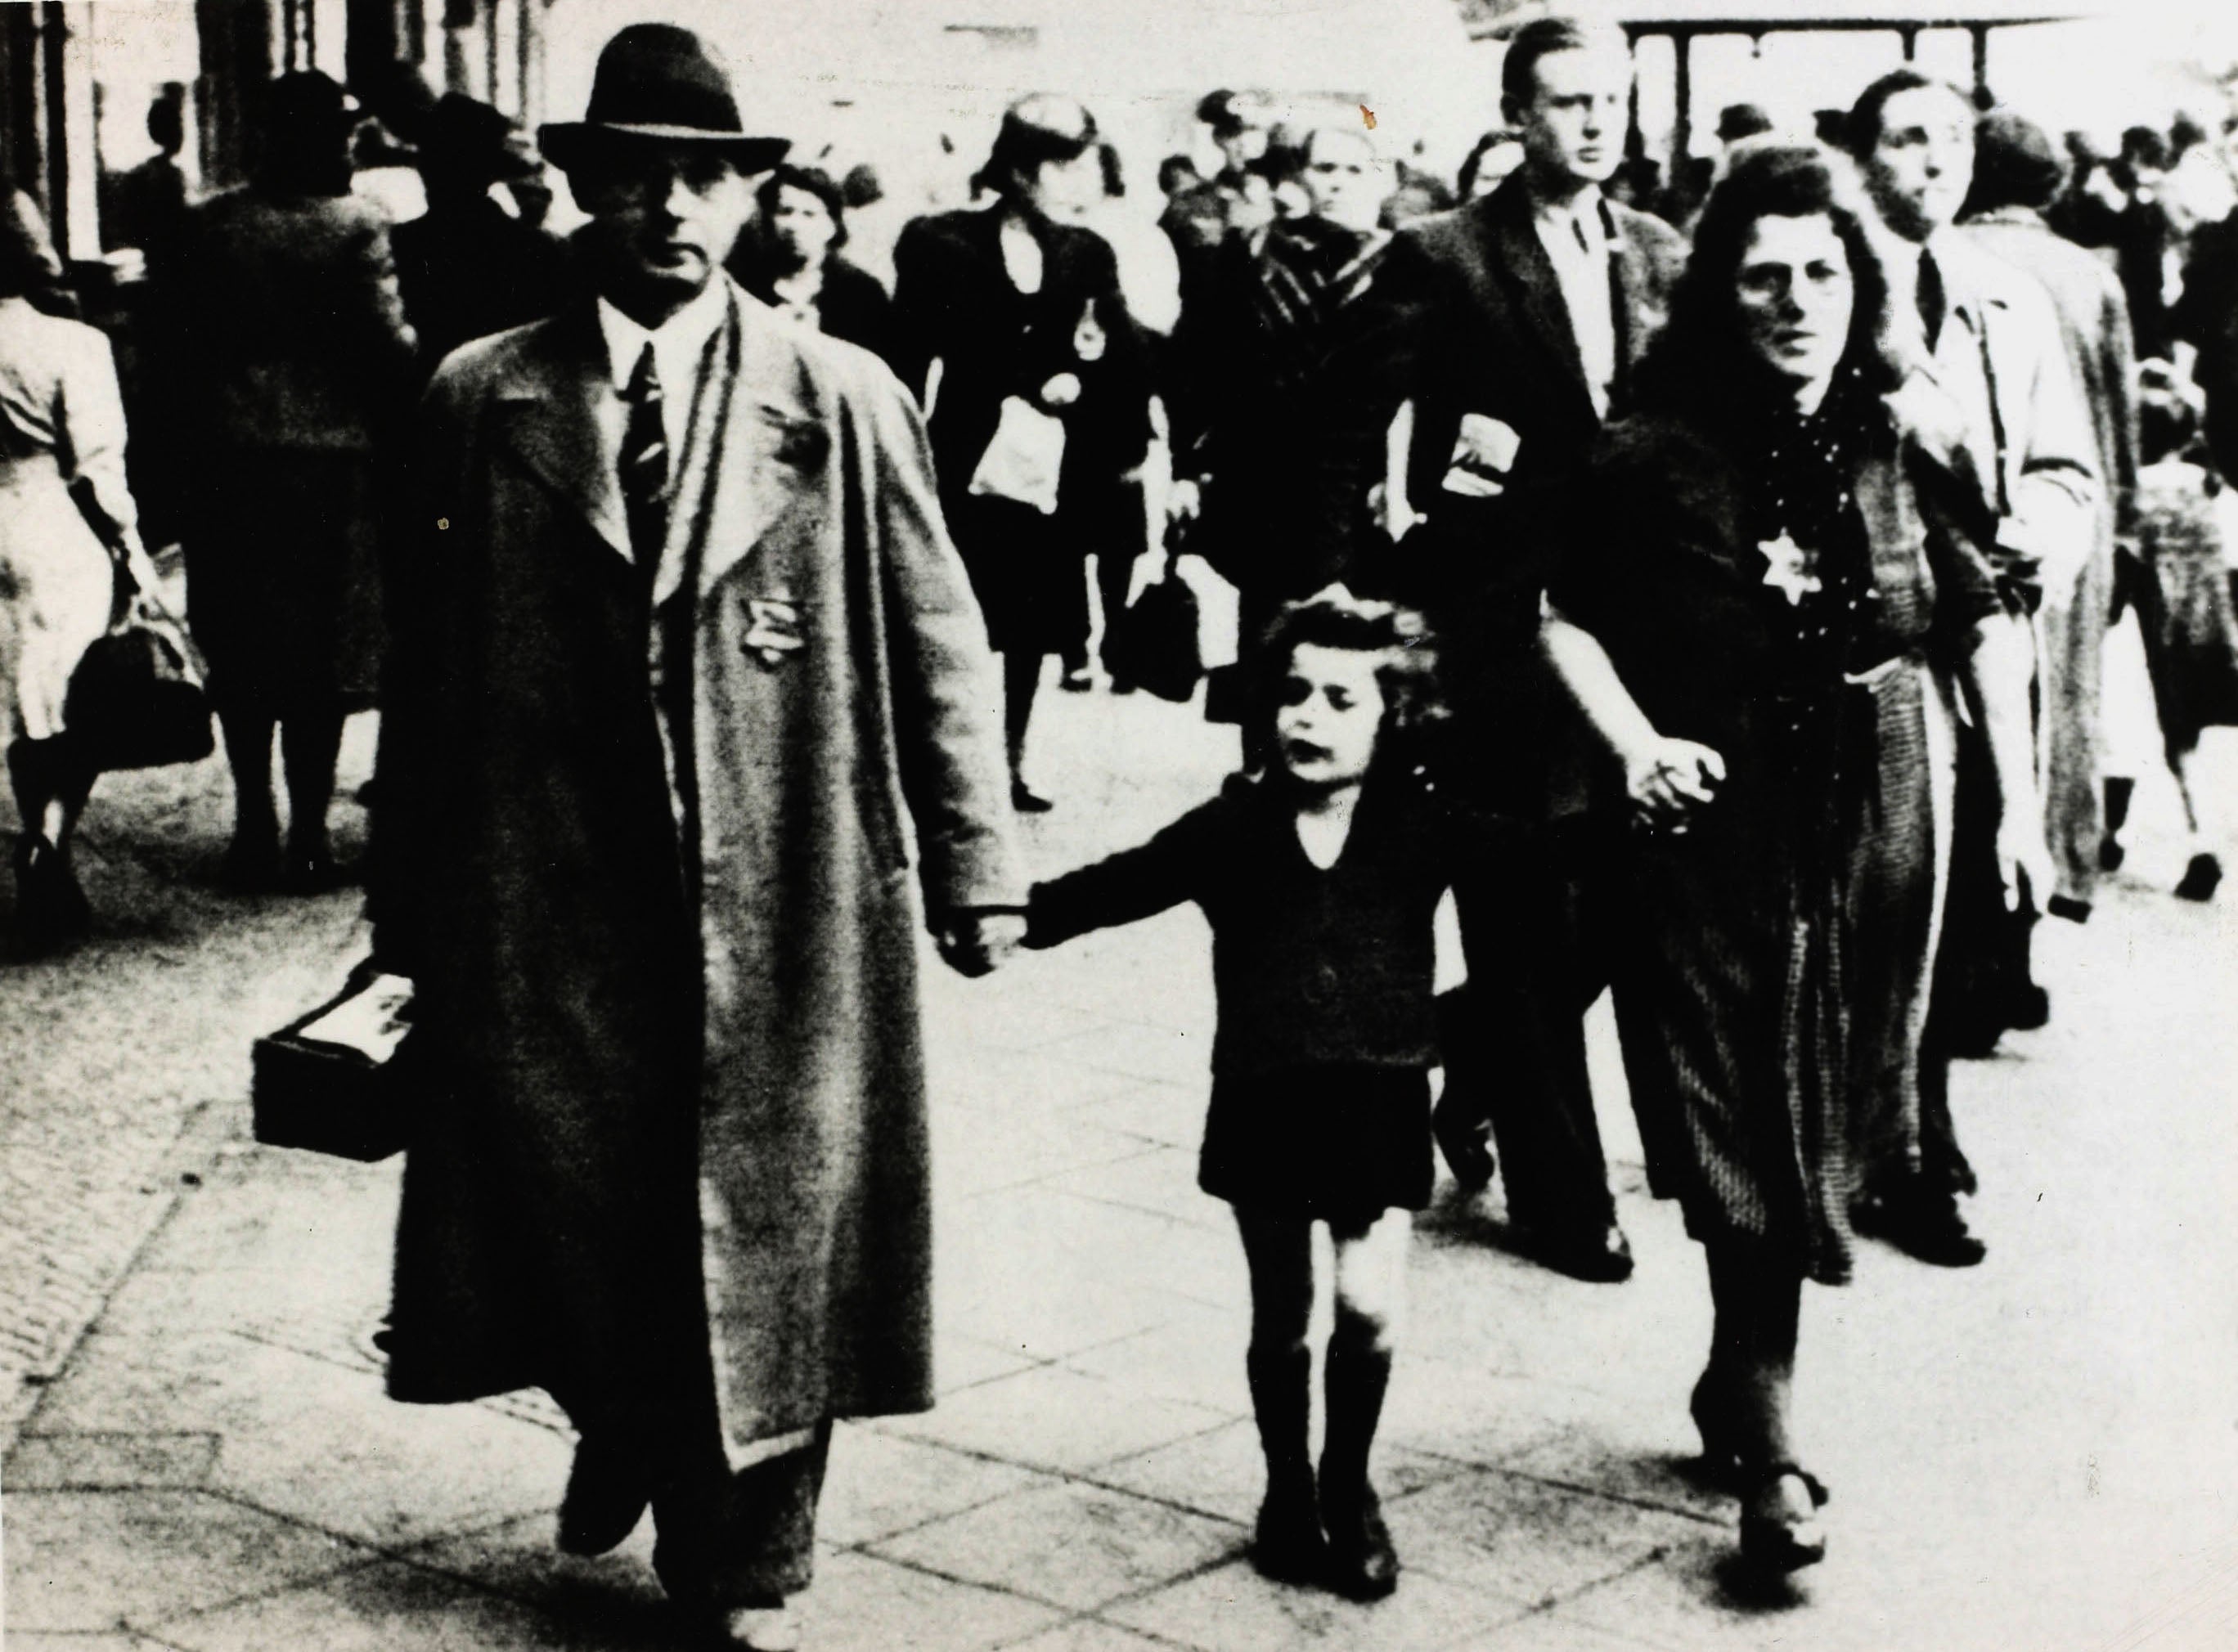 A family wear the Star of David to indicate they are Jews, in 1938: a commonplace sight in Germany after Kristallnacht